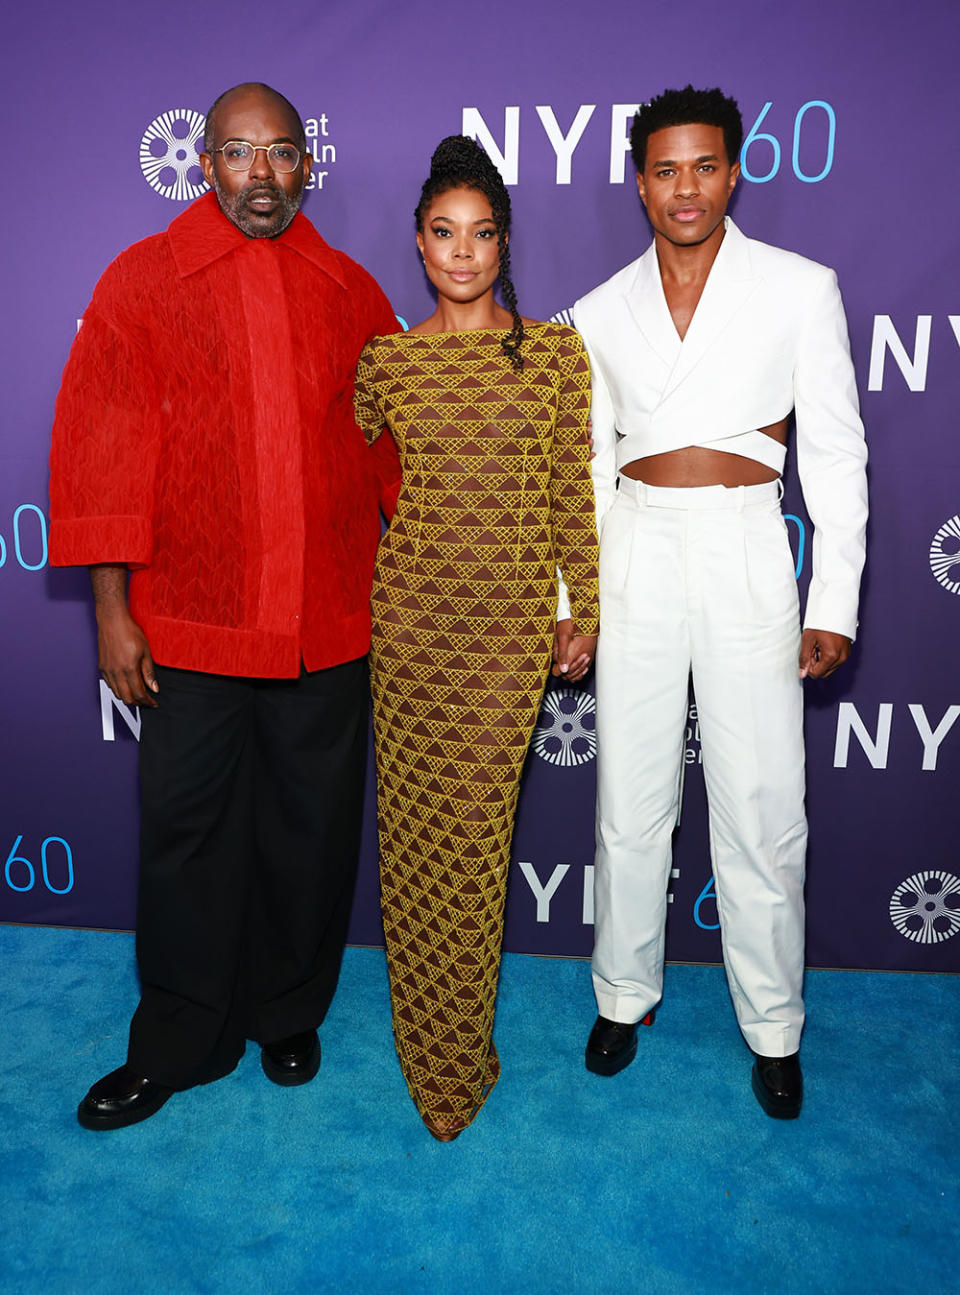 Elegance Bratton, Gabrielle Union and Jeremy Pope attend "The Inspection" red carpet during the 60th New York Film Festival at Alice Tully Hall, Lincoln Center on October 14, 2022 in New York City.